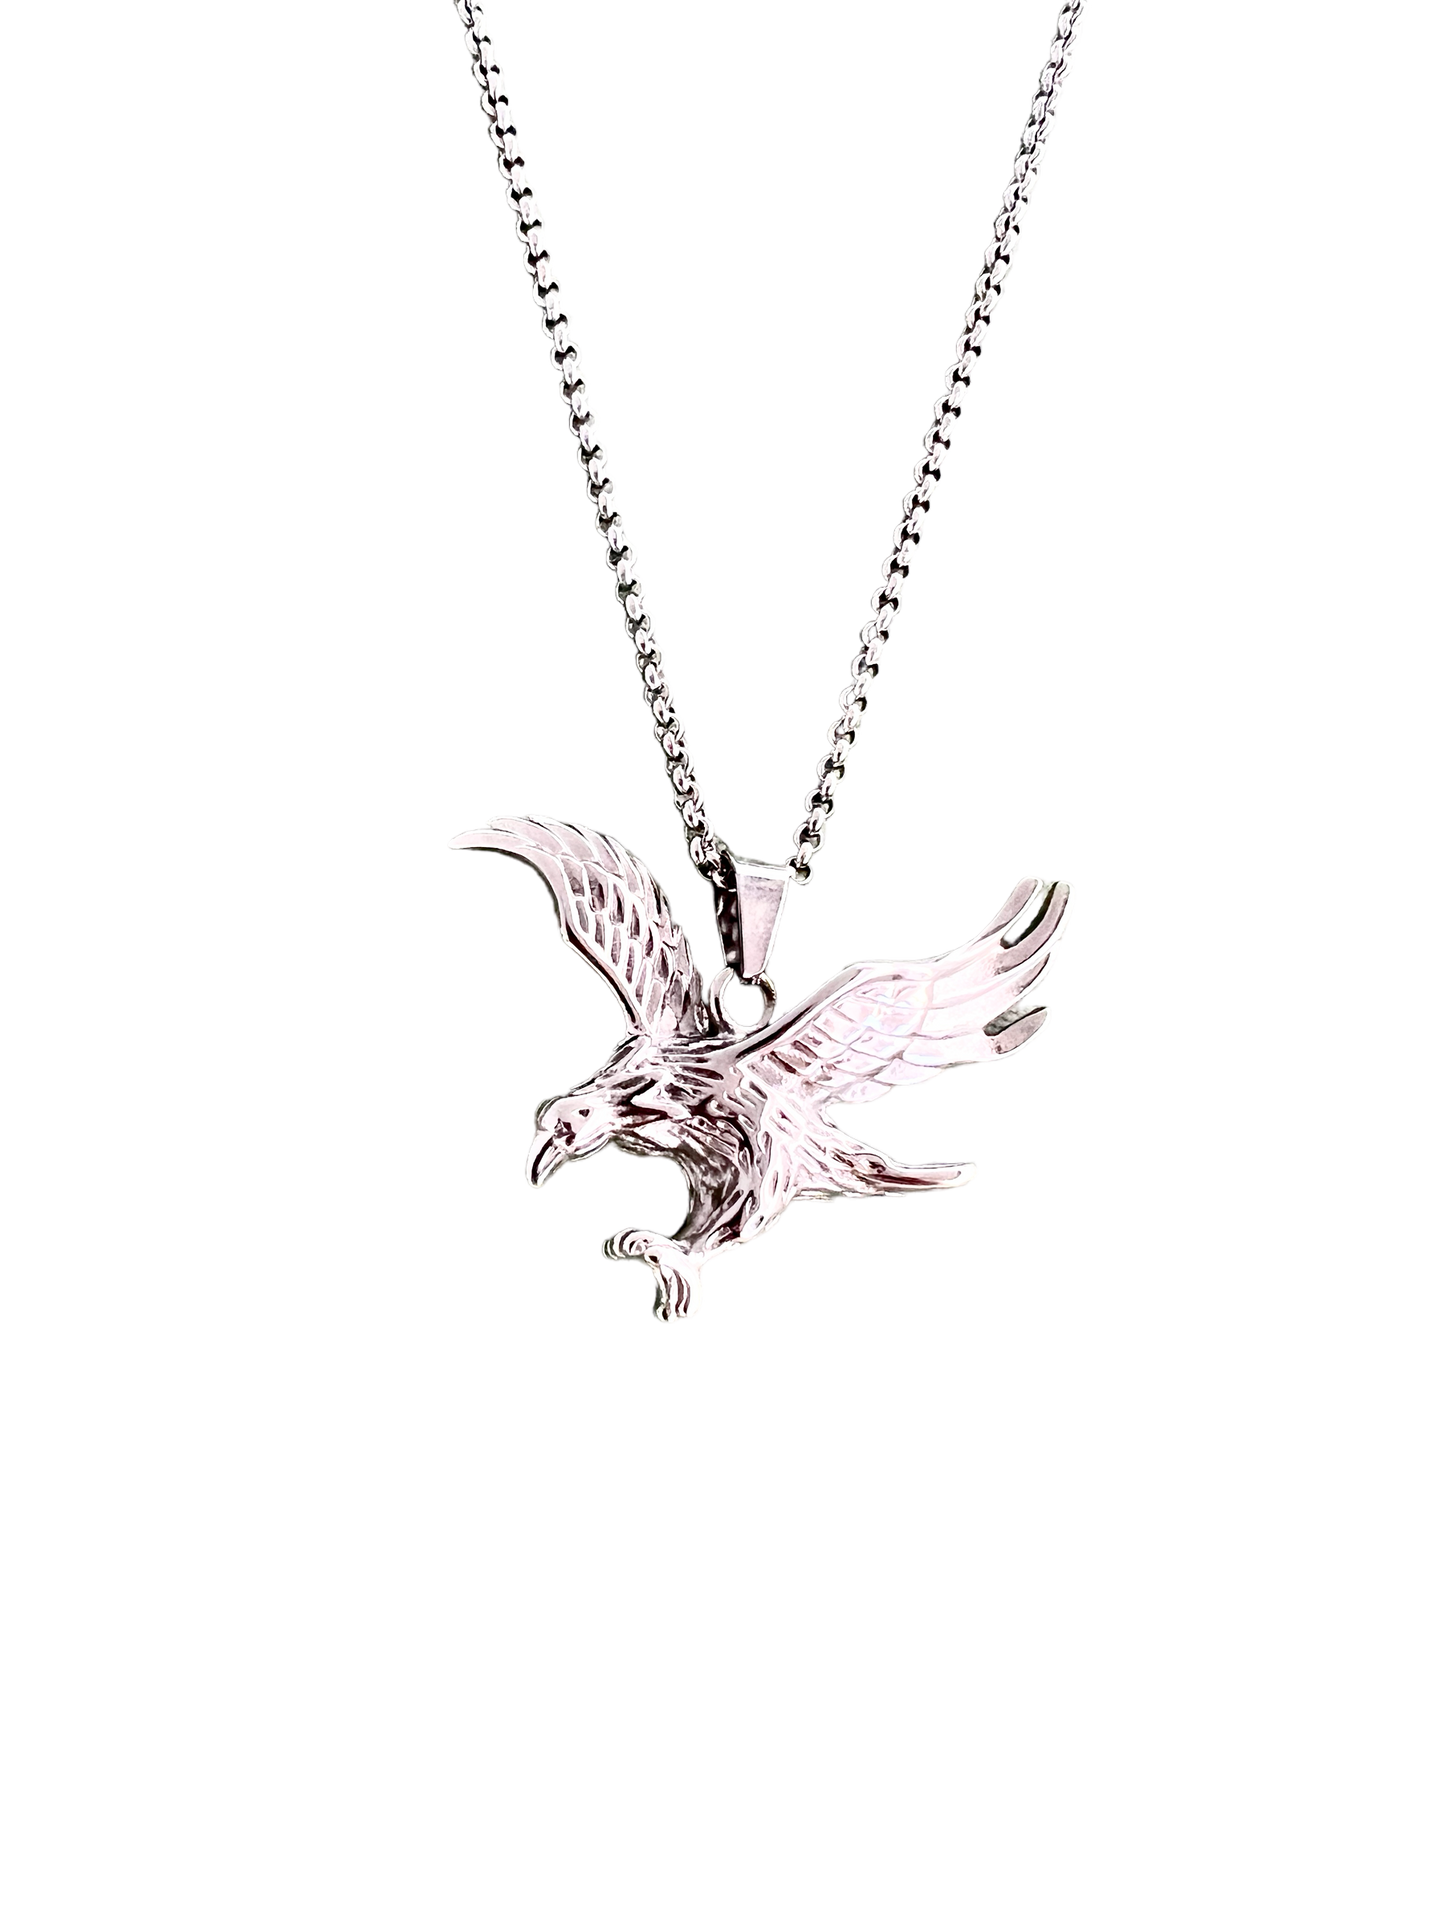 Majestic Eagle Personalized Cremation Urn pendant necklace